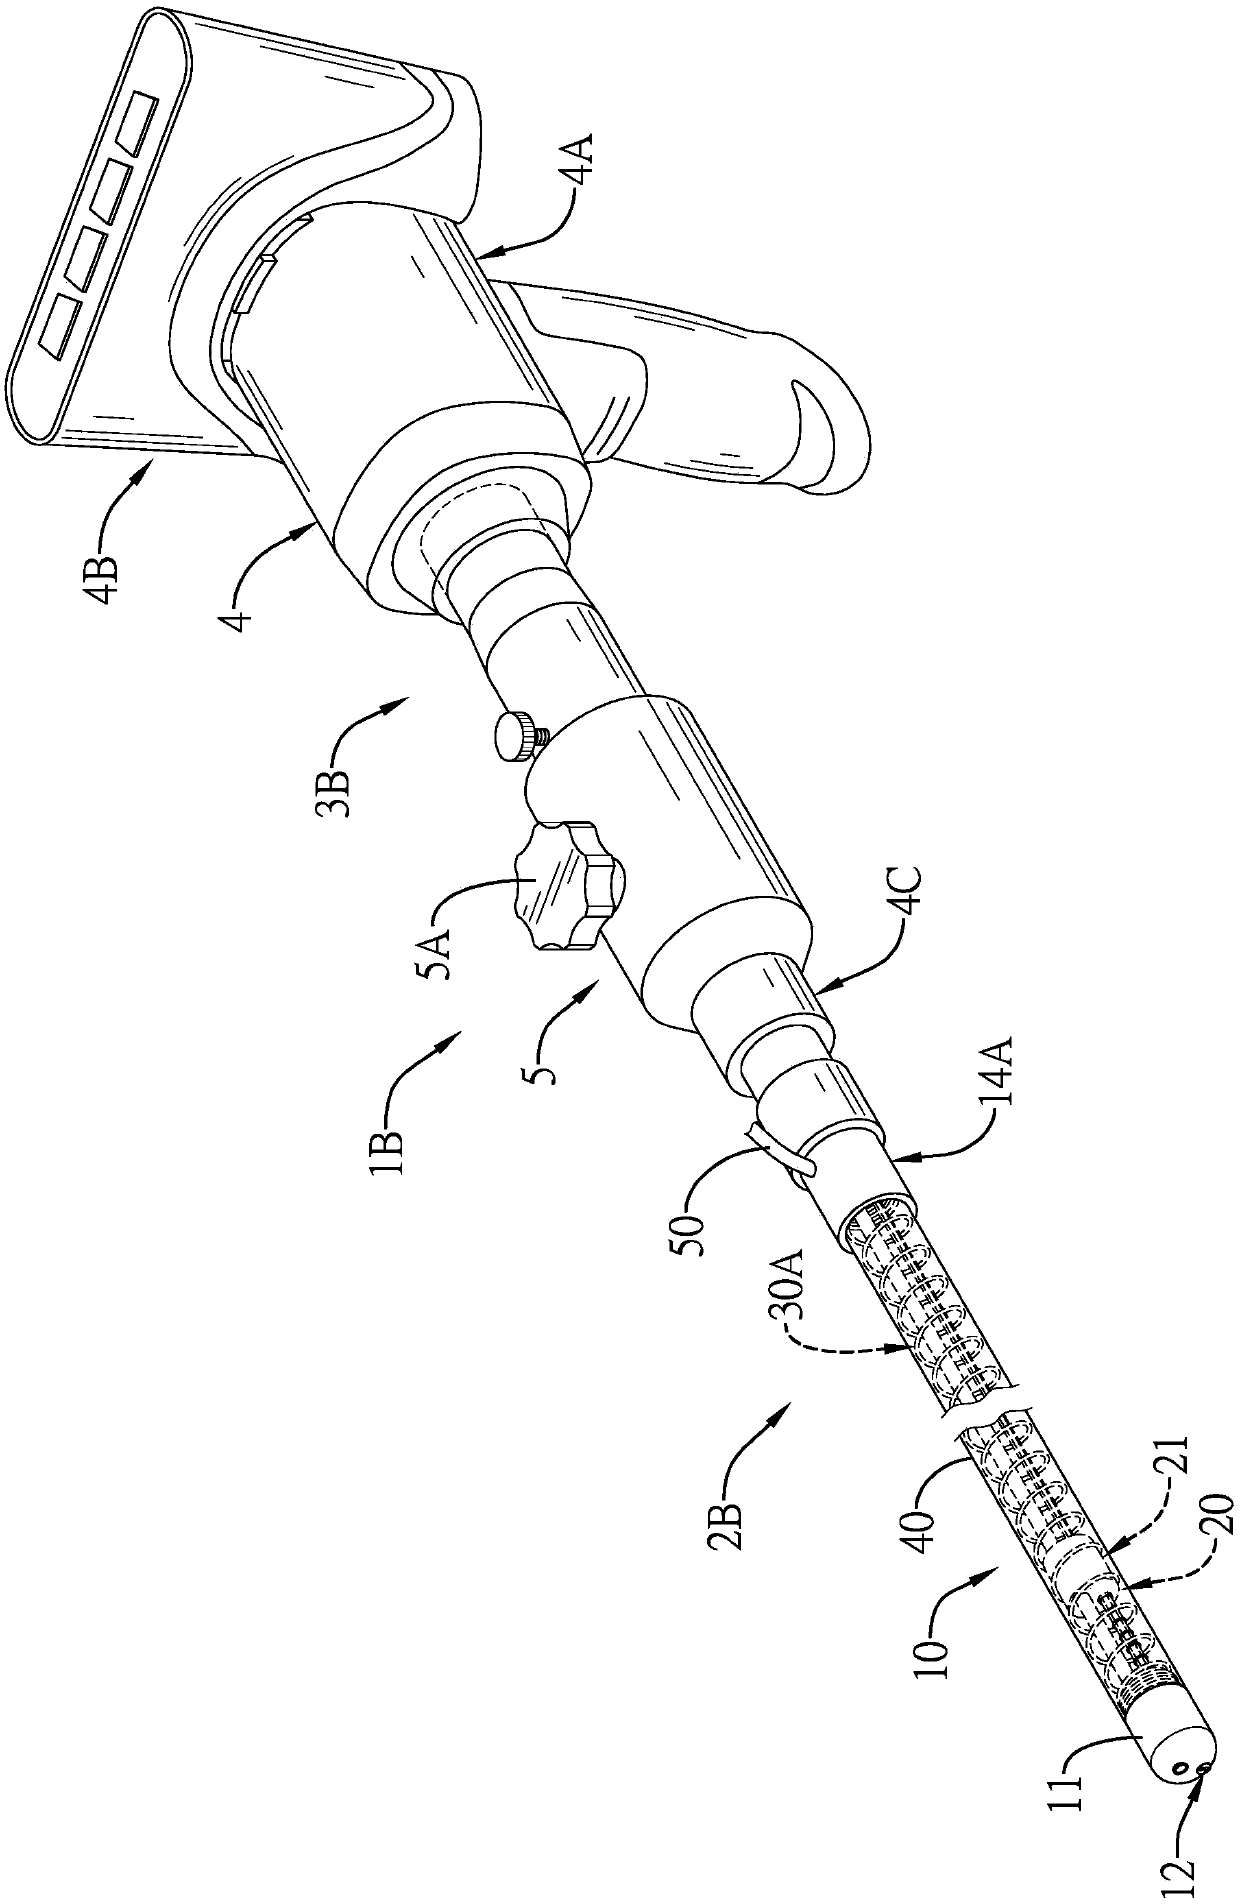 Disposable endoscope set and endoscope device